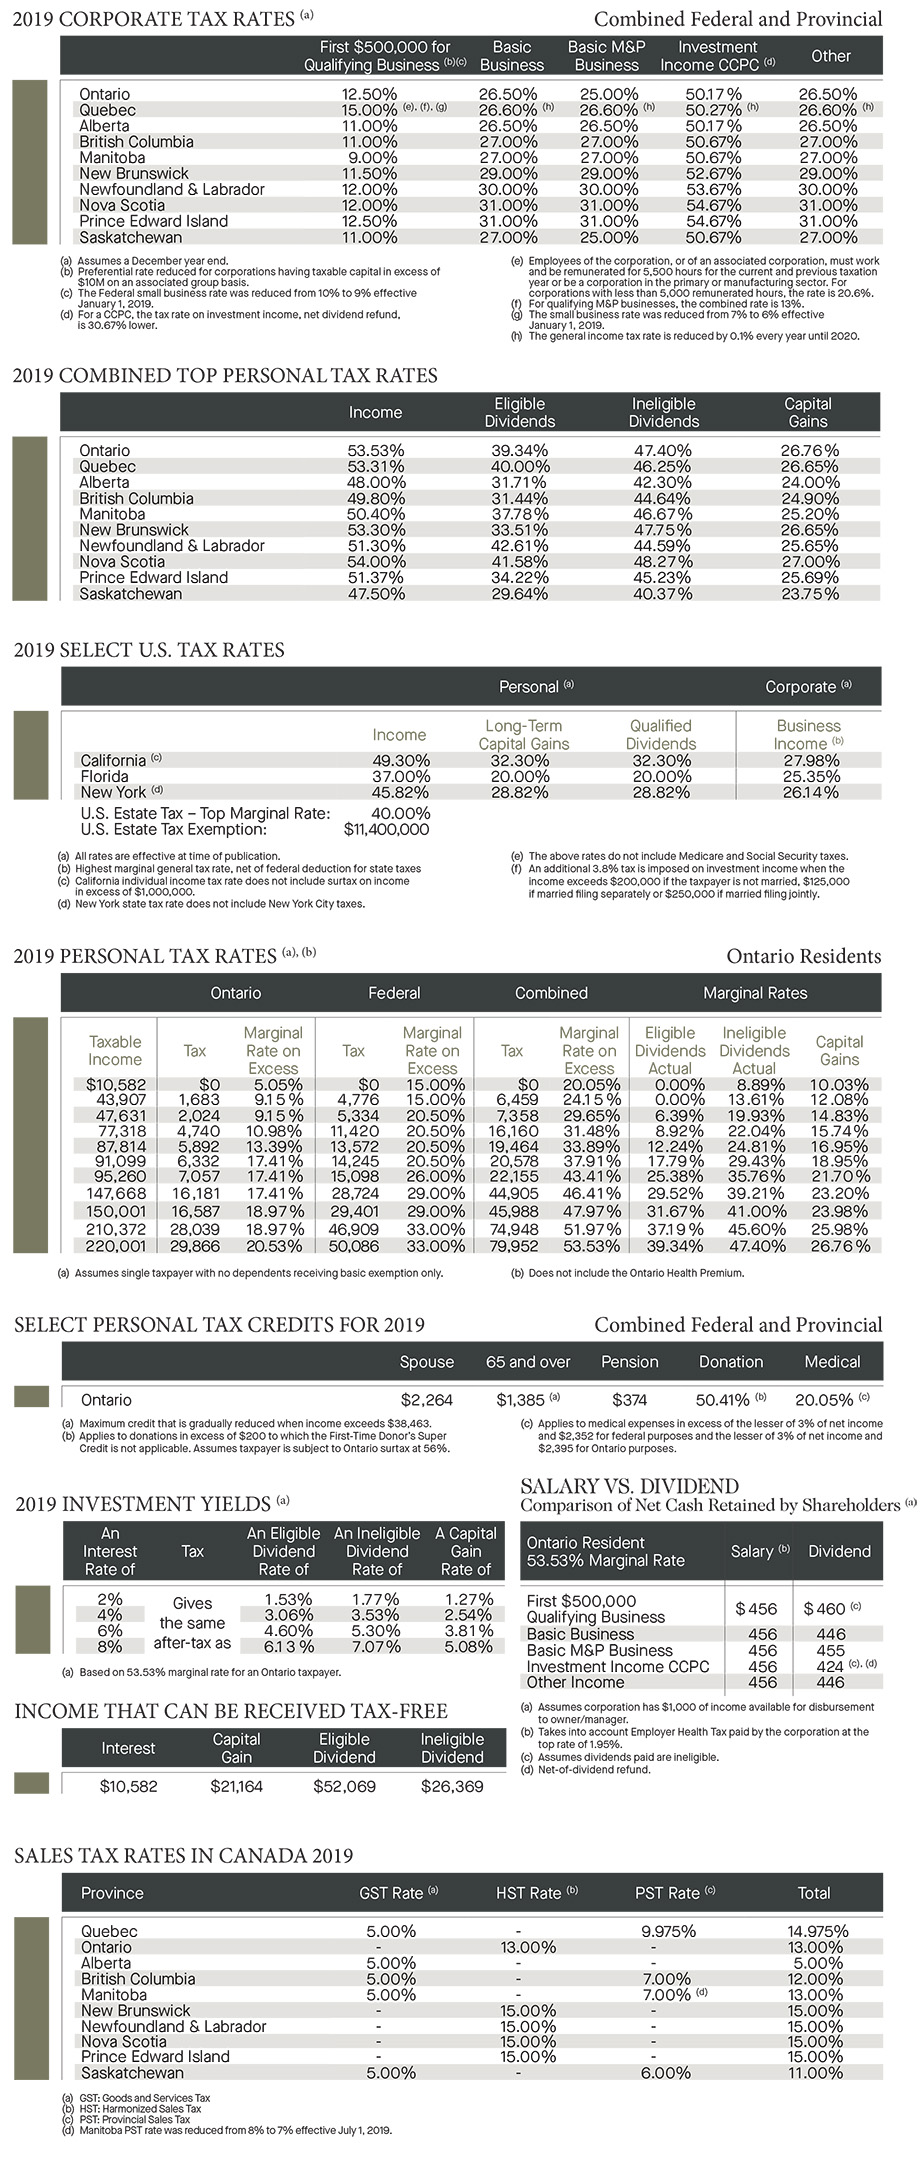 ON tax: 2019 corporate tax rates; 2019 combined top personal tax rates; 2019 select US tax rates; 2019 personal tax rates; select personal tax credits; 2019 investment yields; income that can be received tax free; salary vs dividend; sales tax rates in Canada 2019